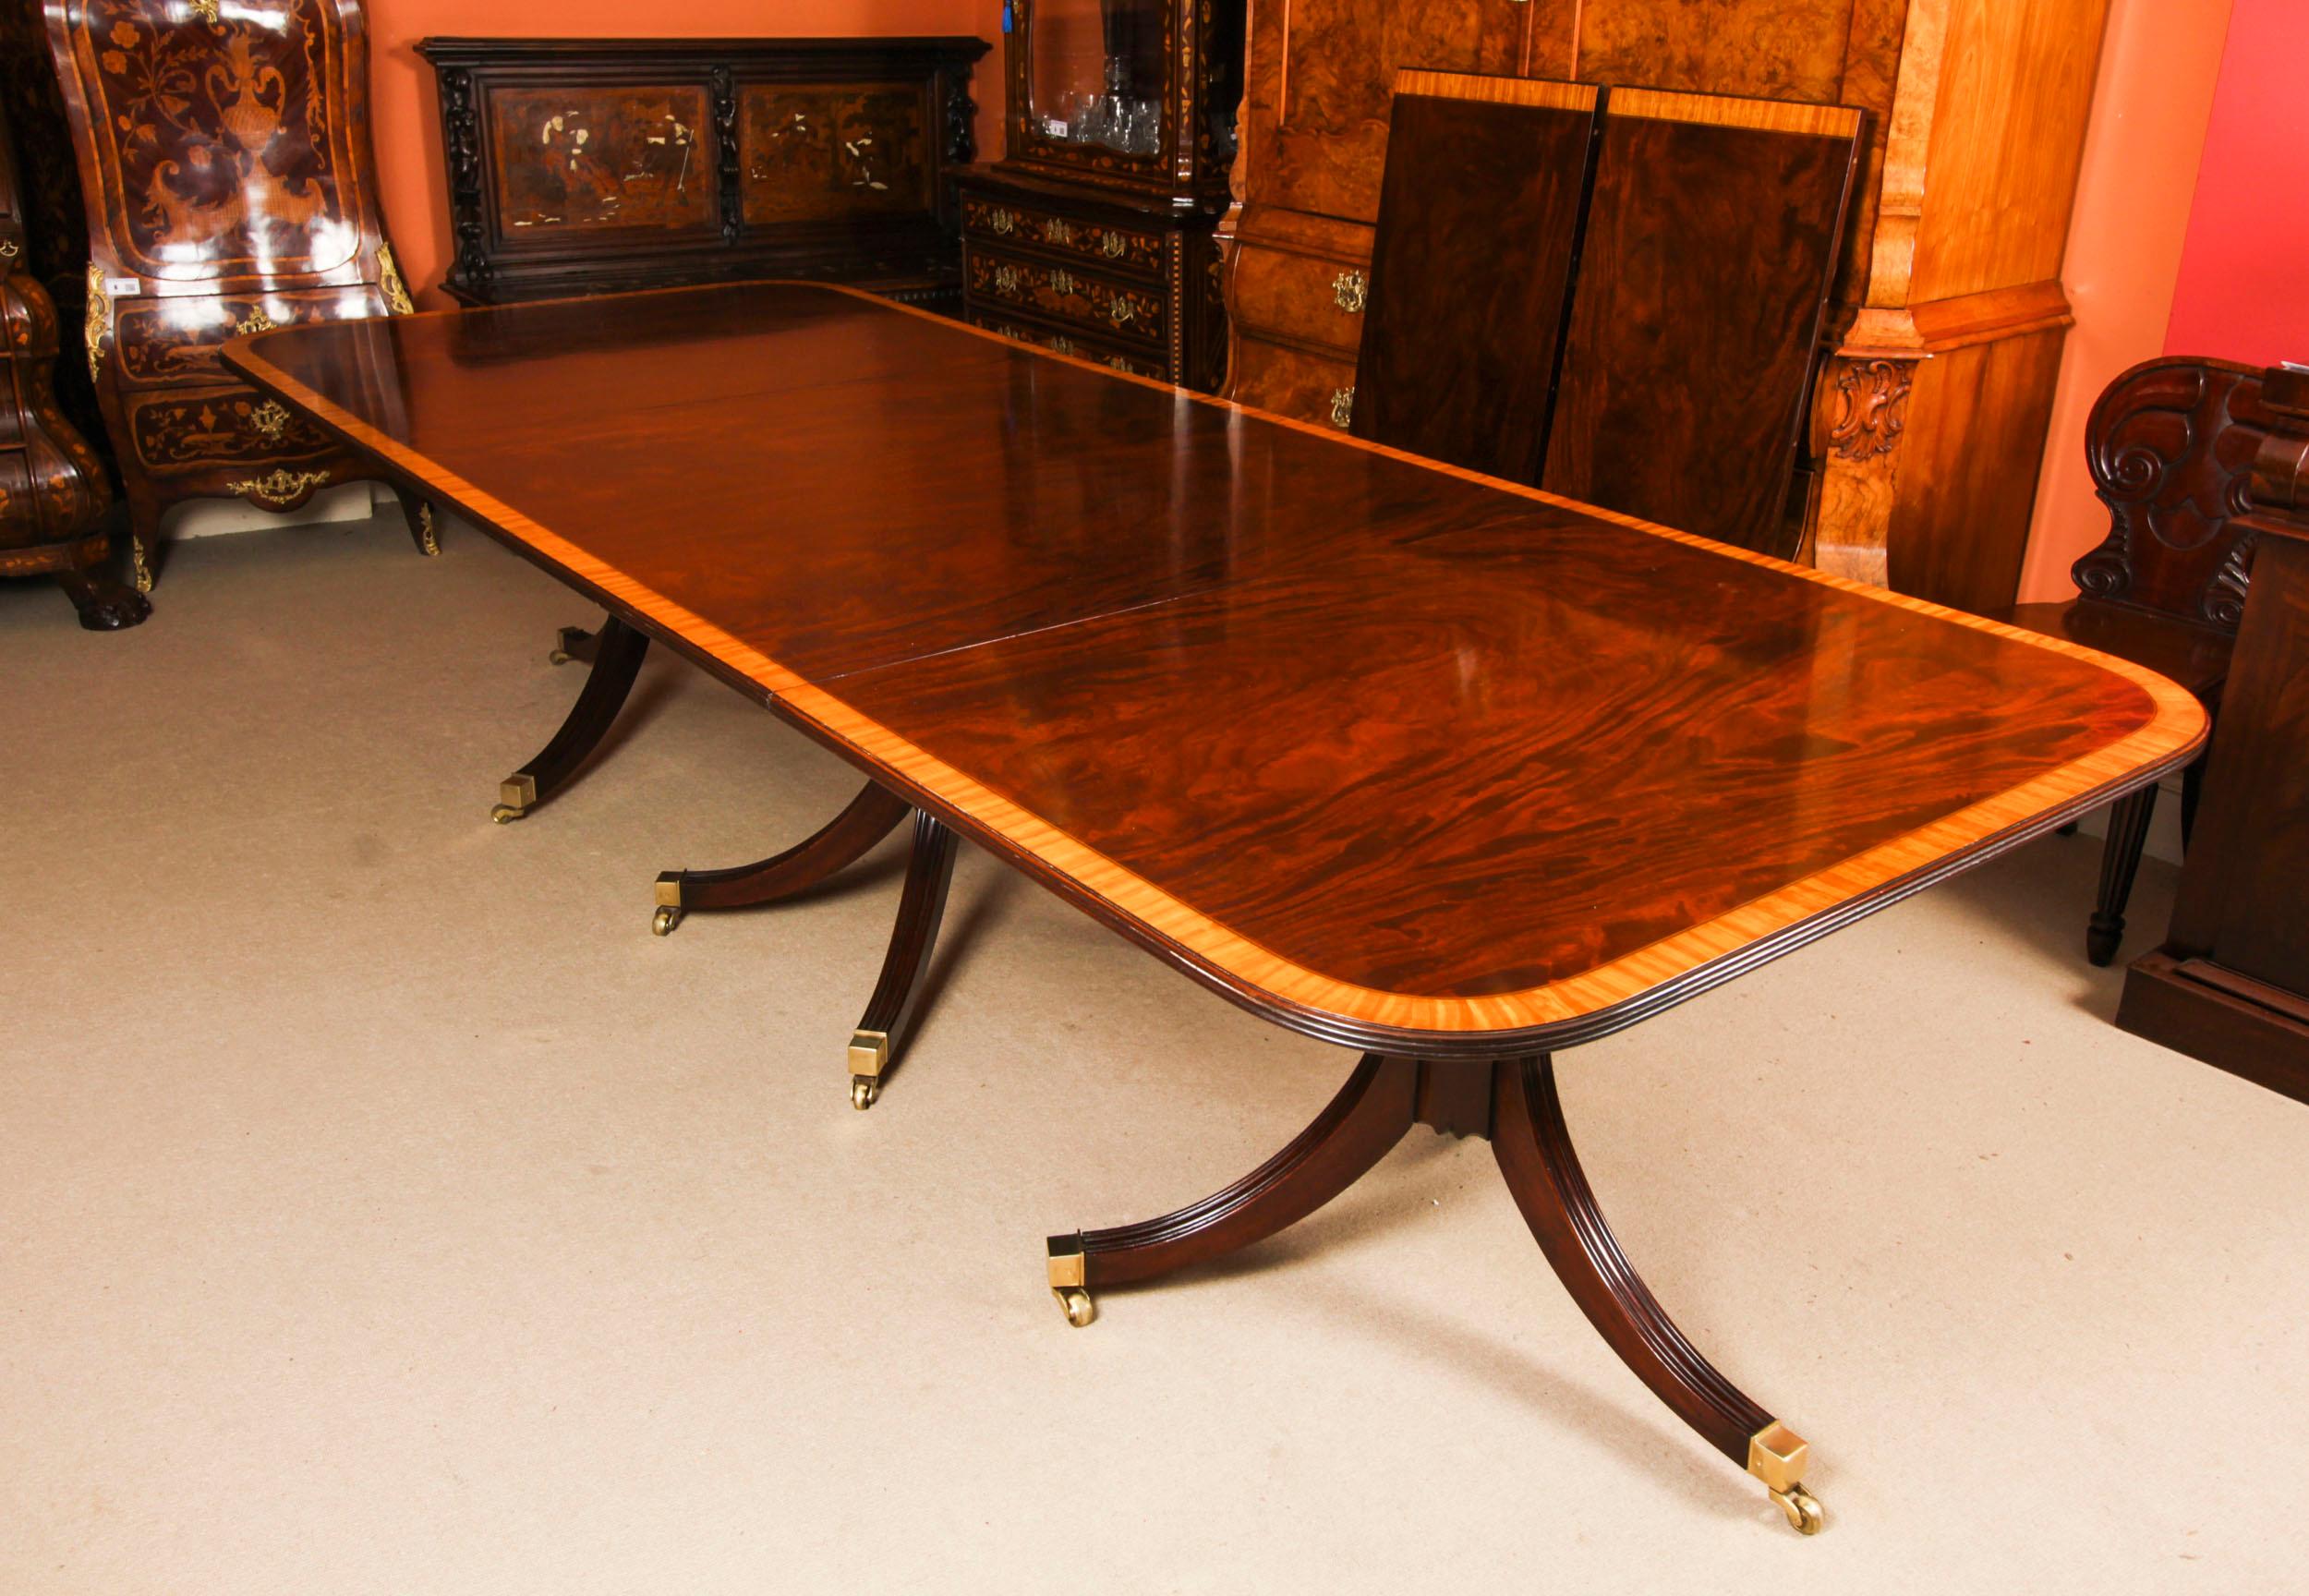 Vintage 13ft Three Pillar Mahogany Dining Table with 14 Chairs 20th C For Sale 1